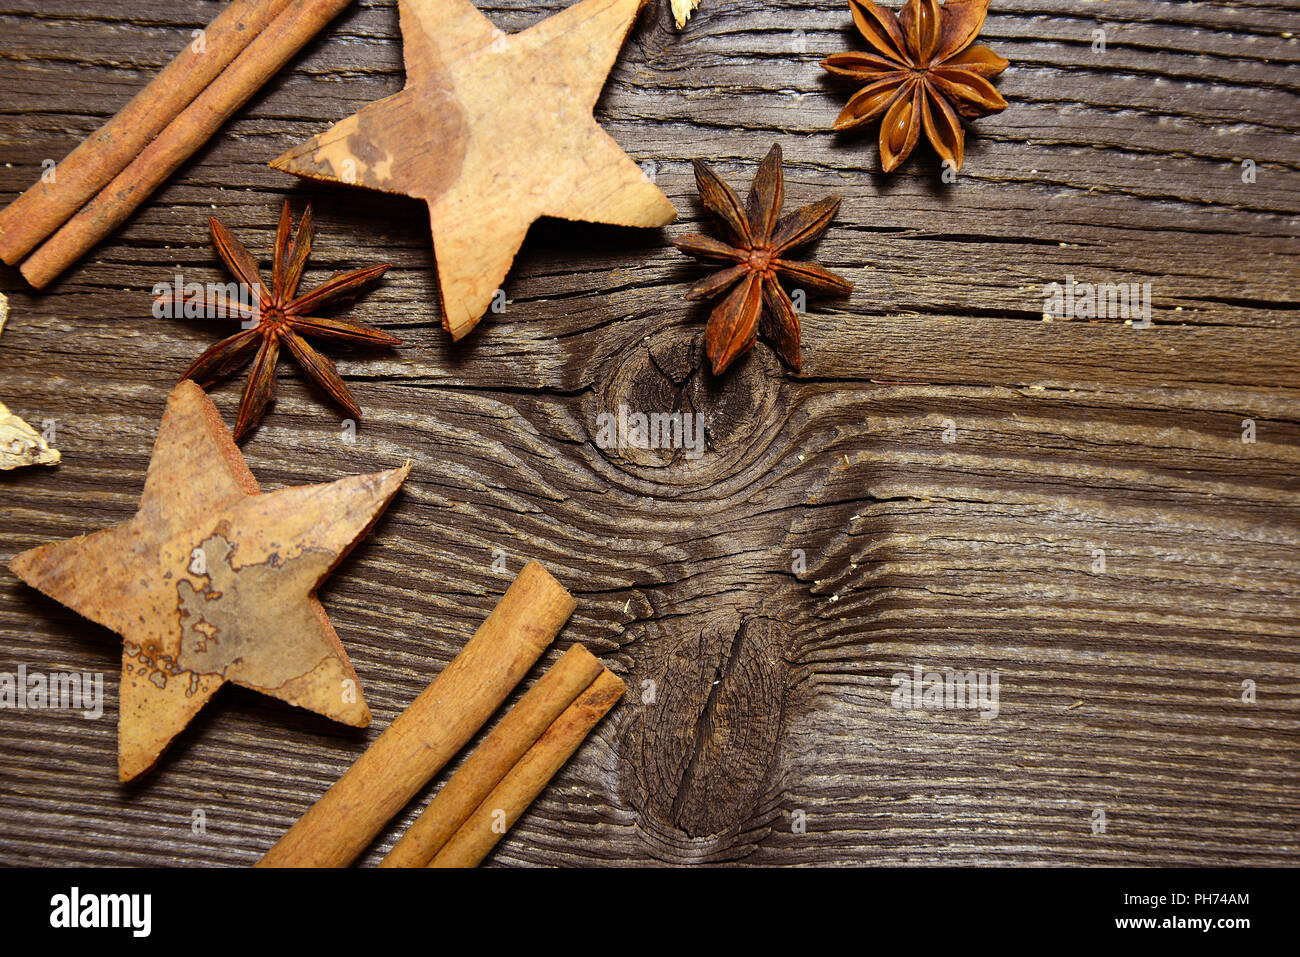 Christmas wooden background Stock Photo